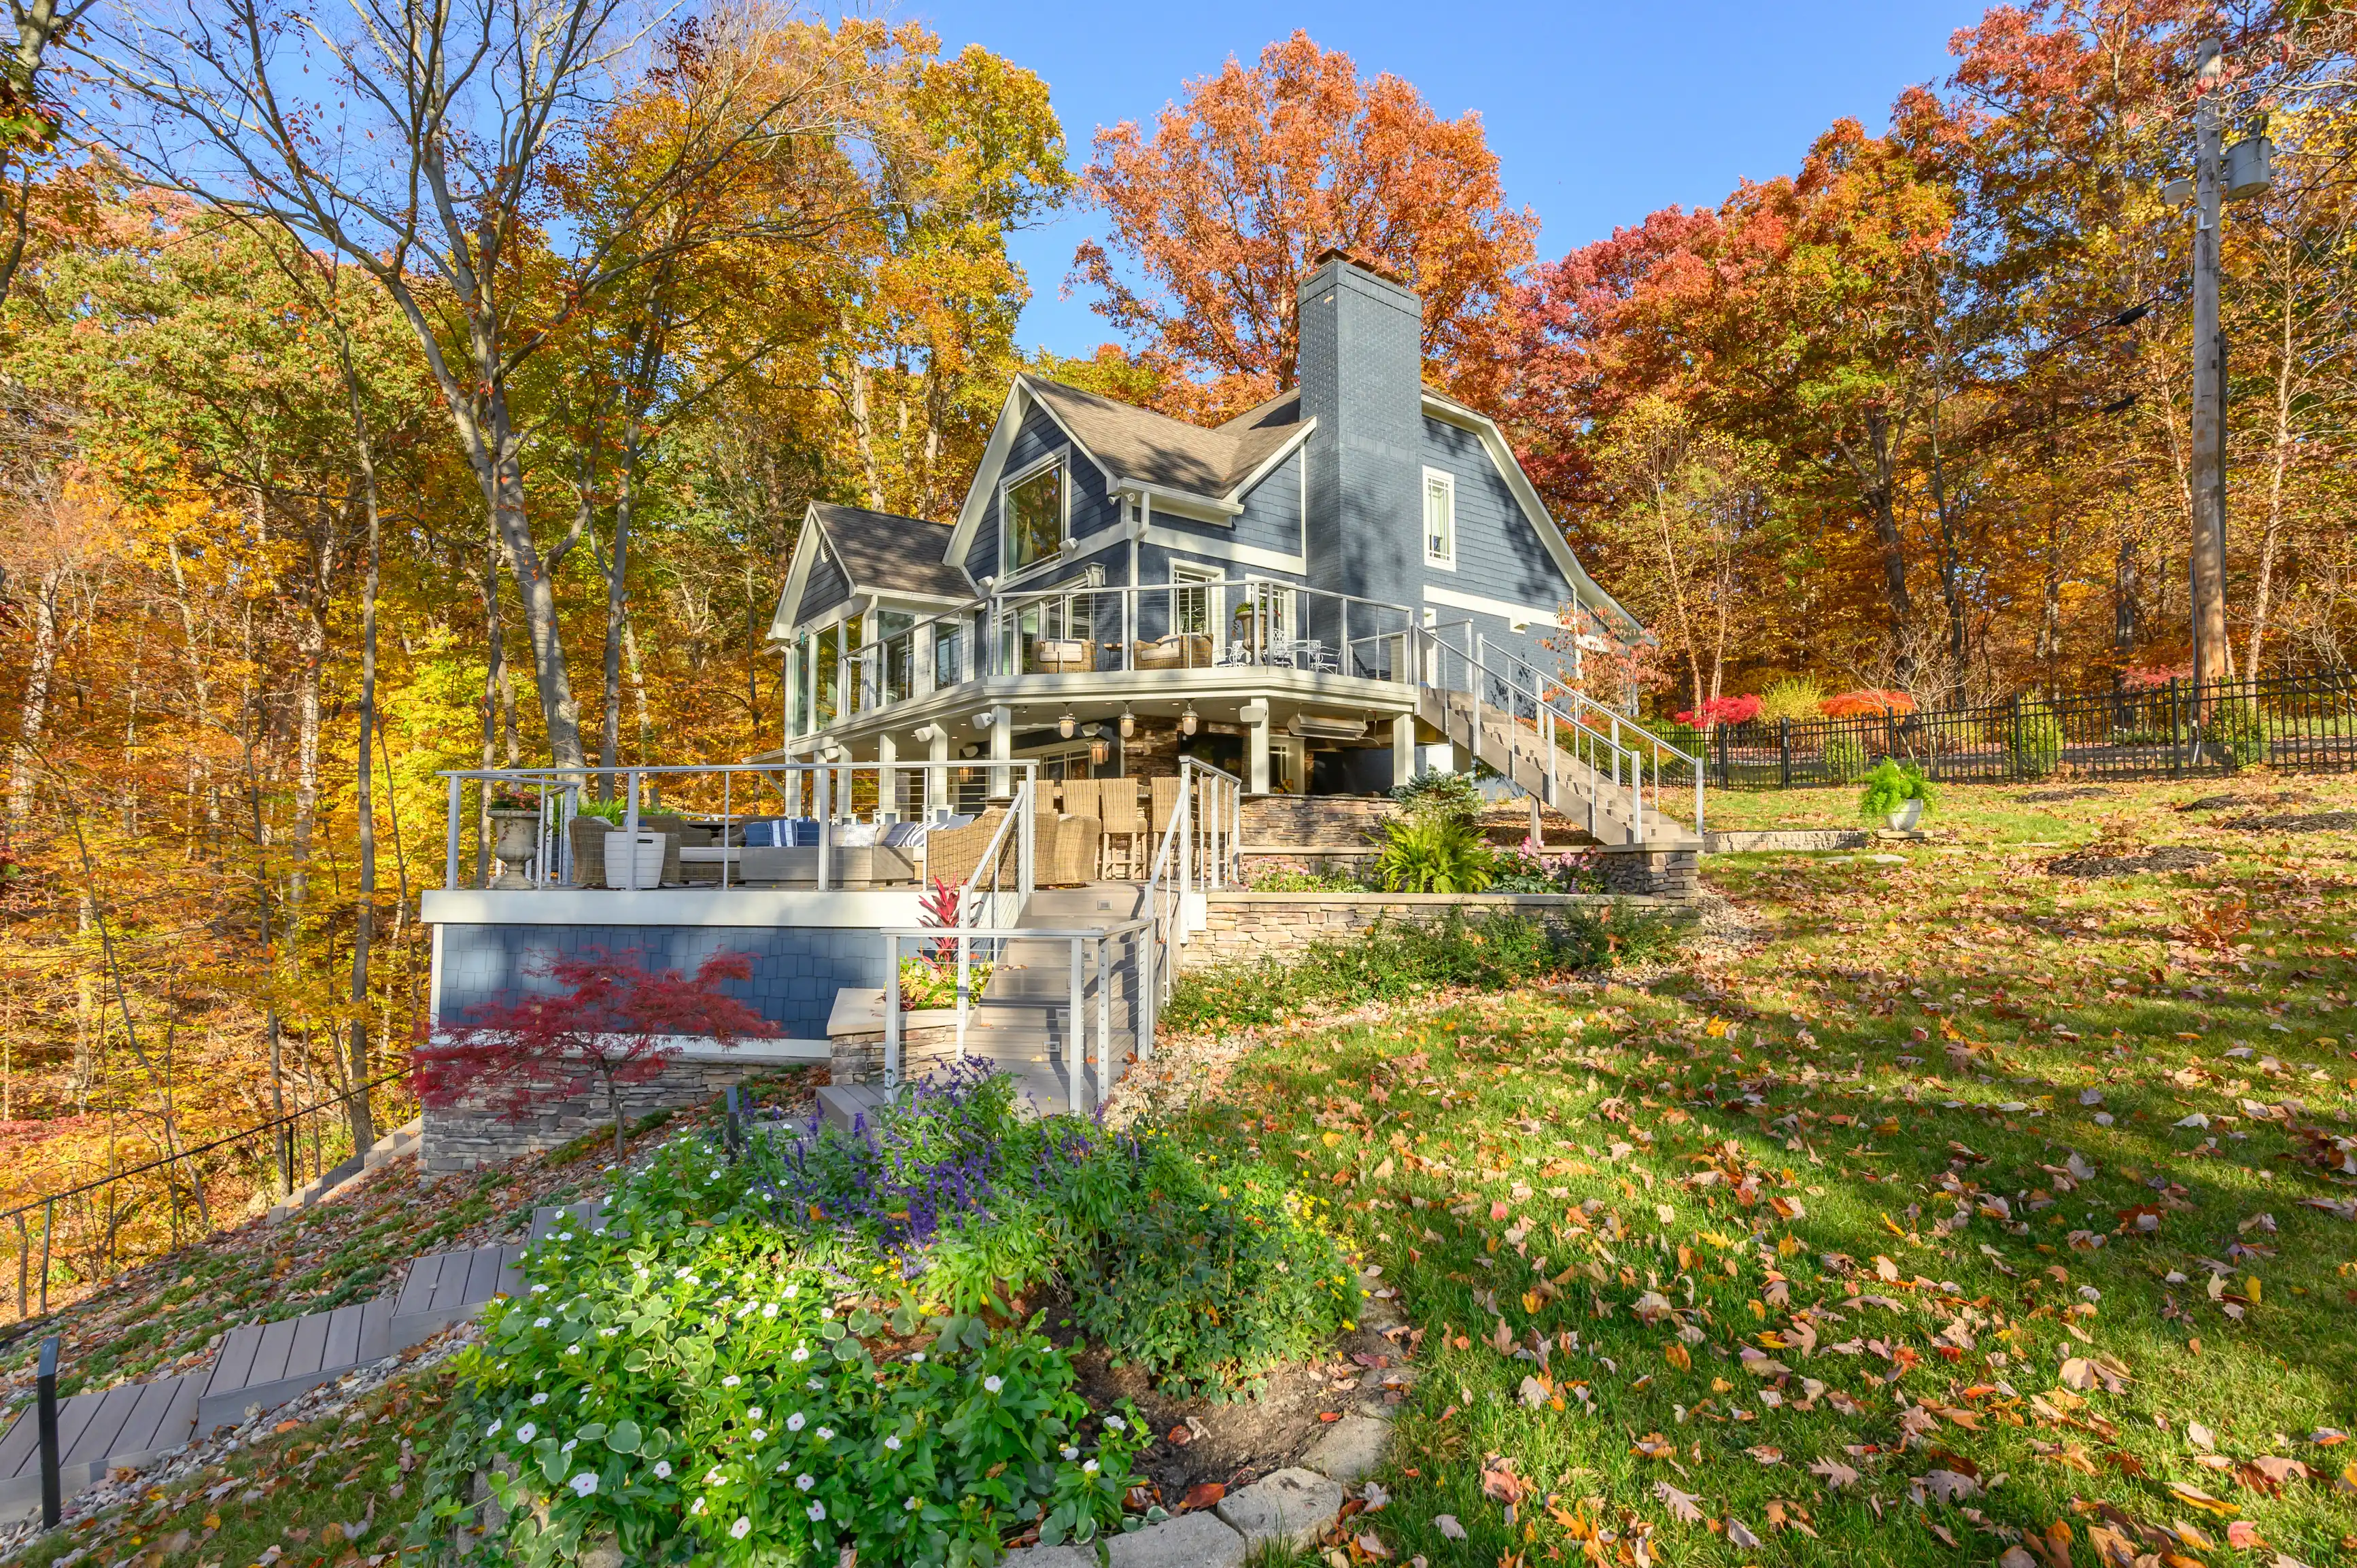 A large two-story house with a wraparound porch surrounded by trees with autumn foliage and a landscaped garden in the foreground.